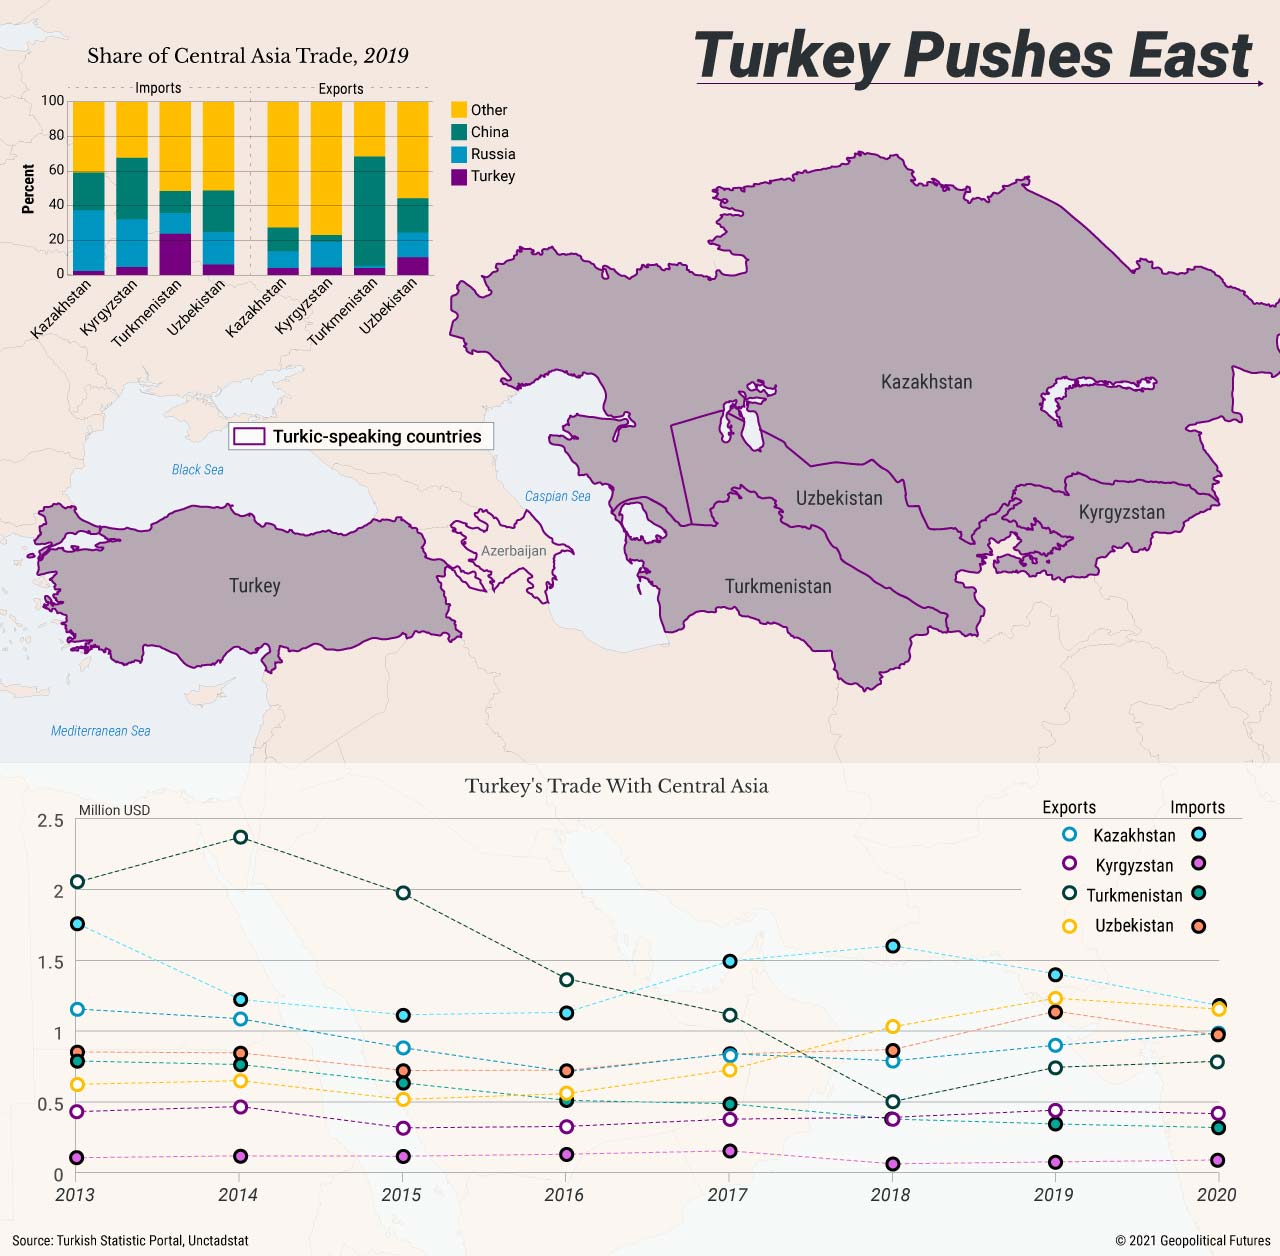 Turkey Pushes East - Turkish interest in Central Asia